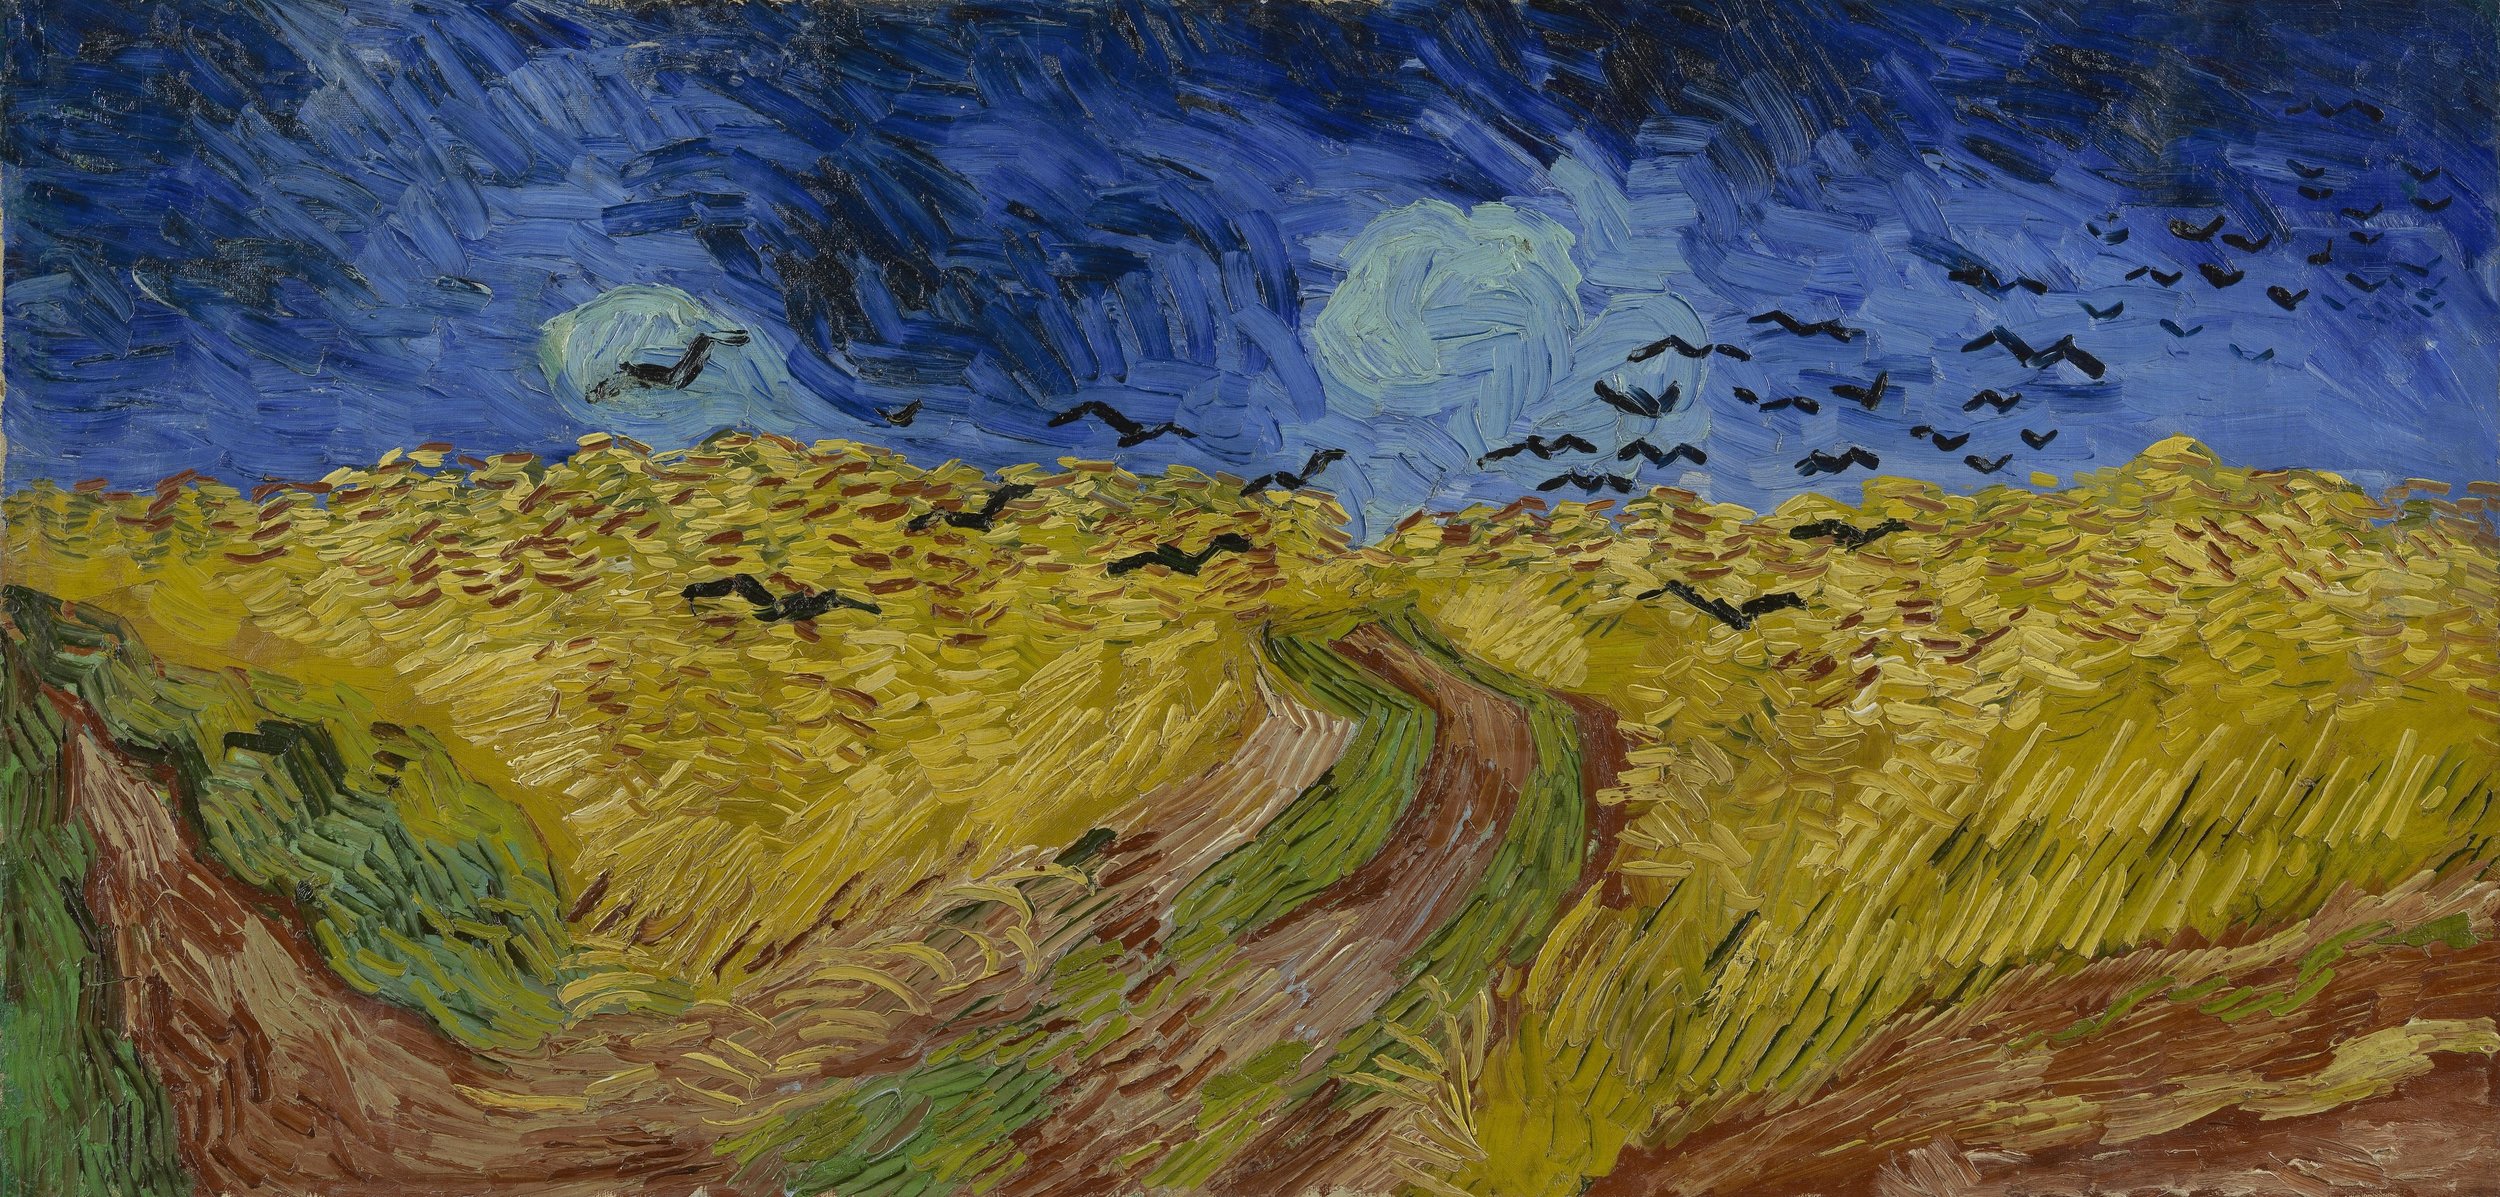 Copy of Vincent Van Gogh, Wheatfield with Crows